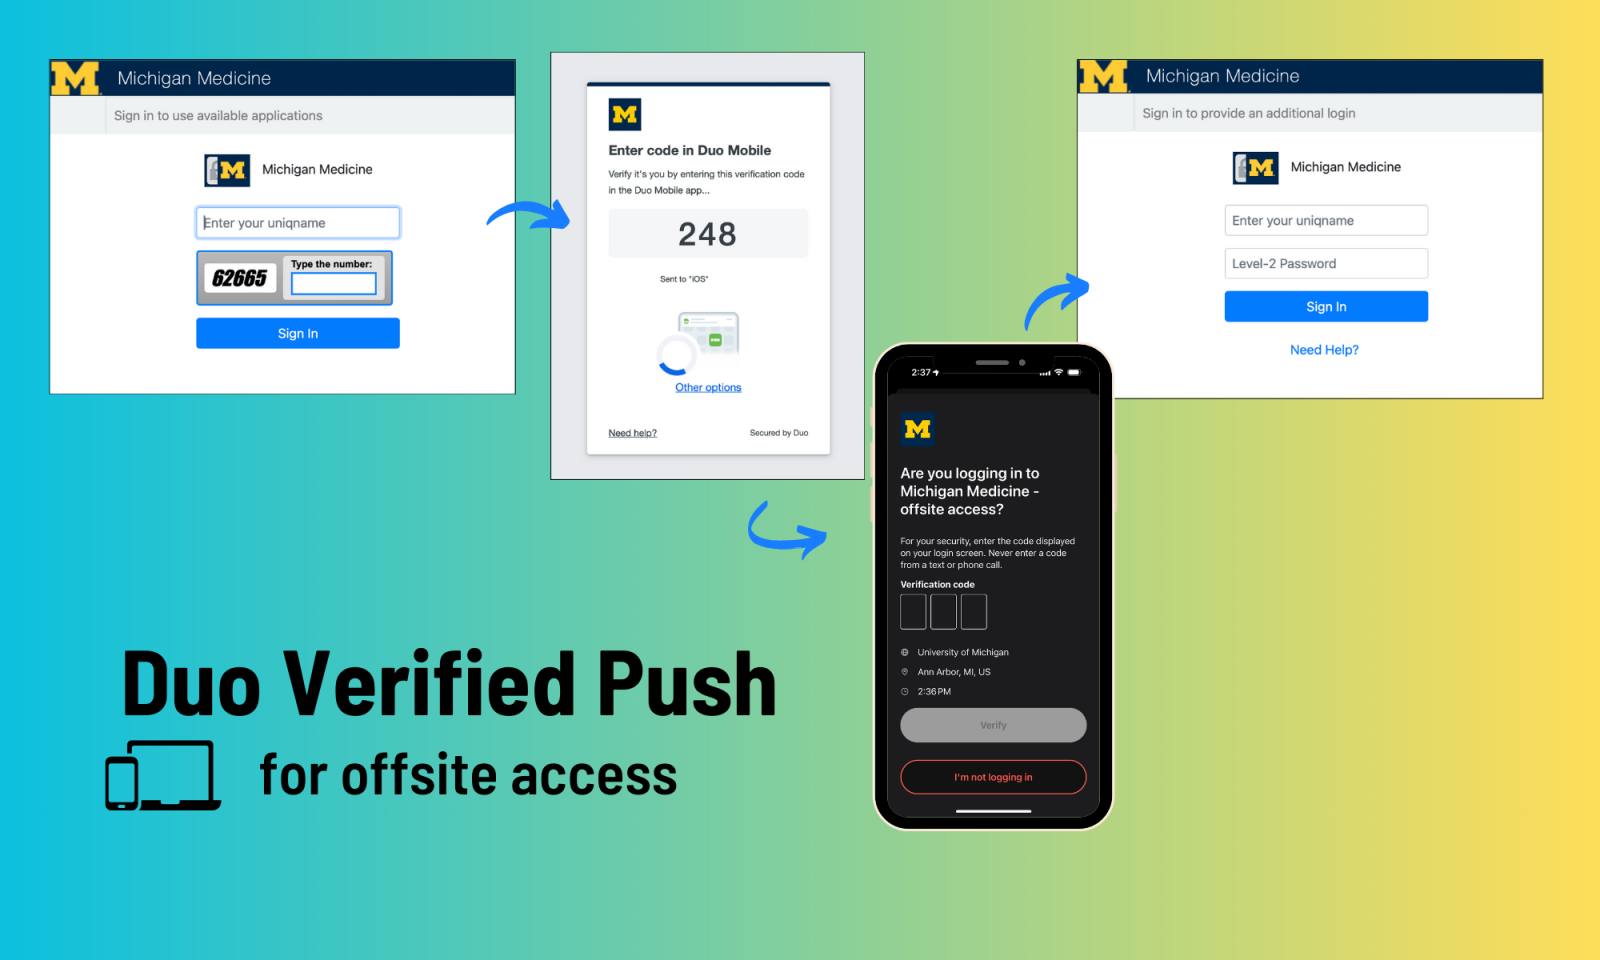 screenshots illustrating the steps for Duo Verified Push with numeric codes